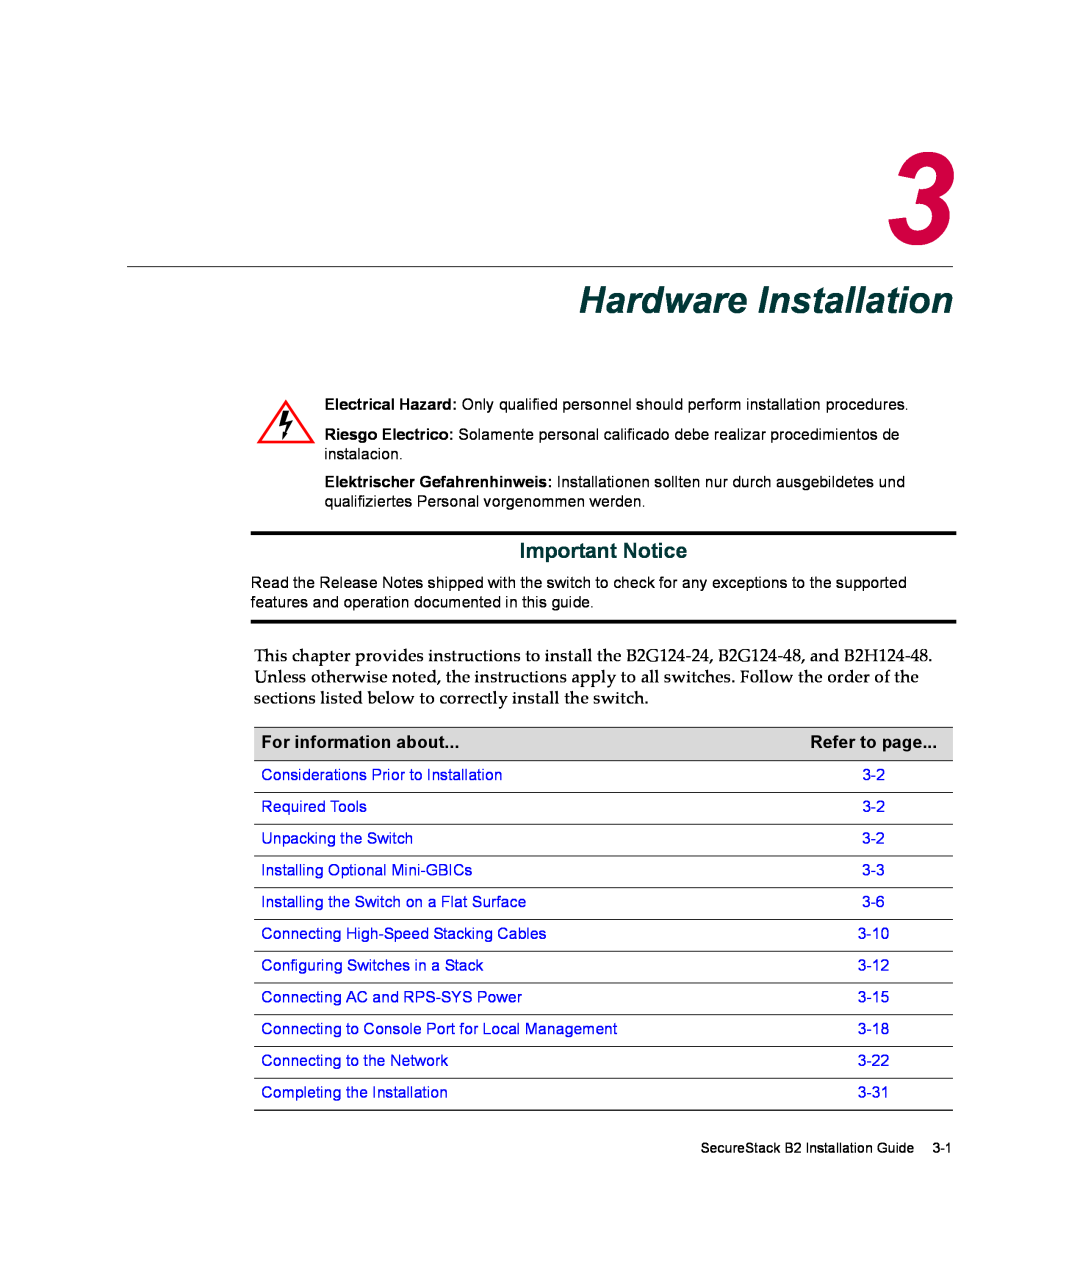 Enterasys Networks B2G124-24 manual Hardware Installation, Important Notice, For information about, Refer to page 